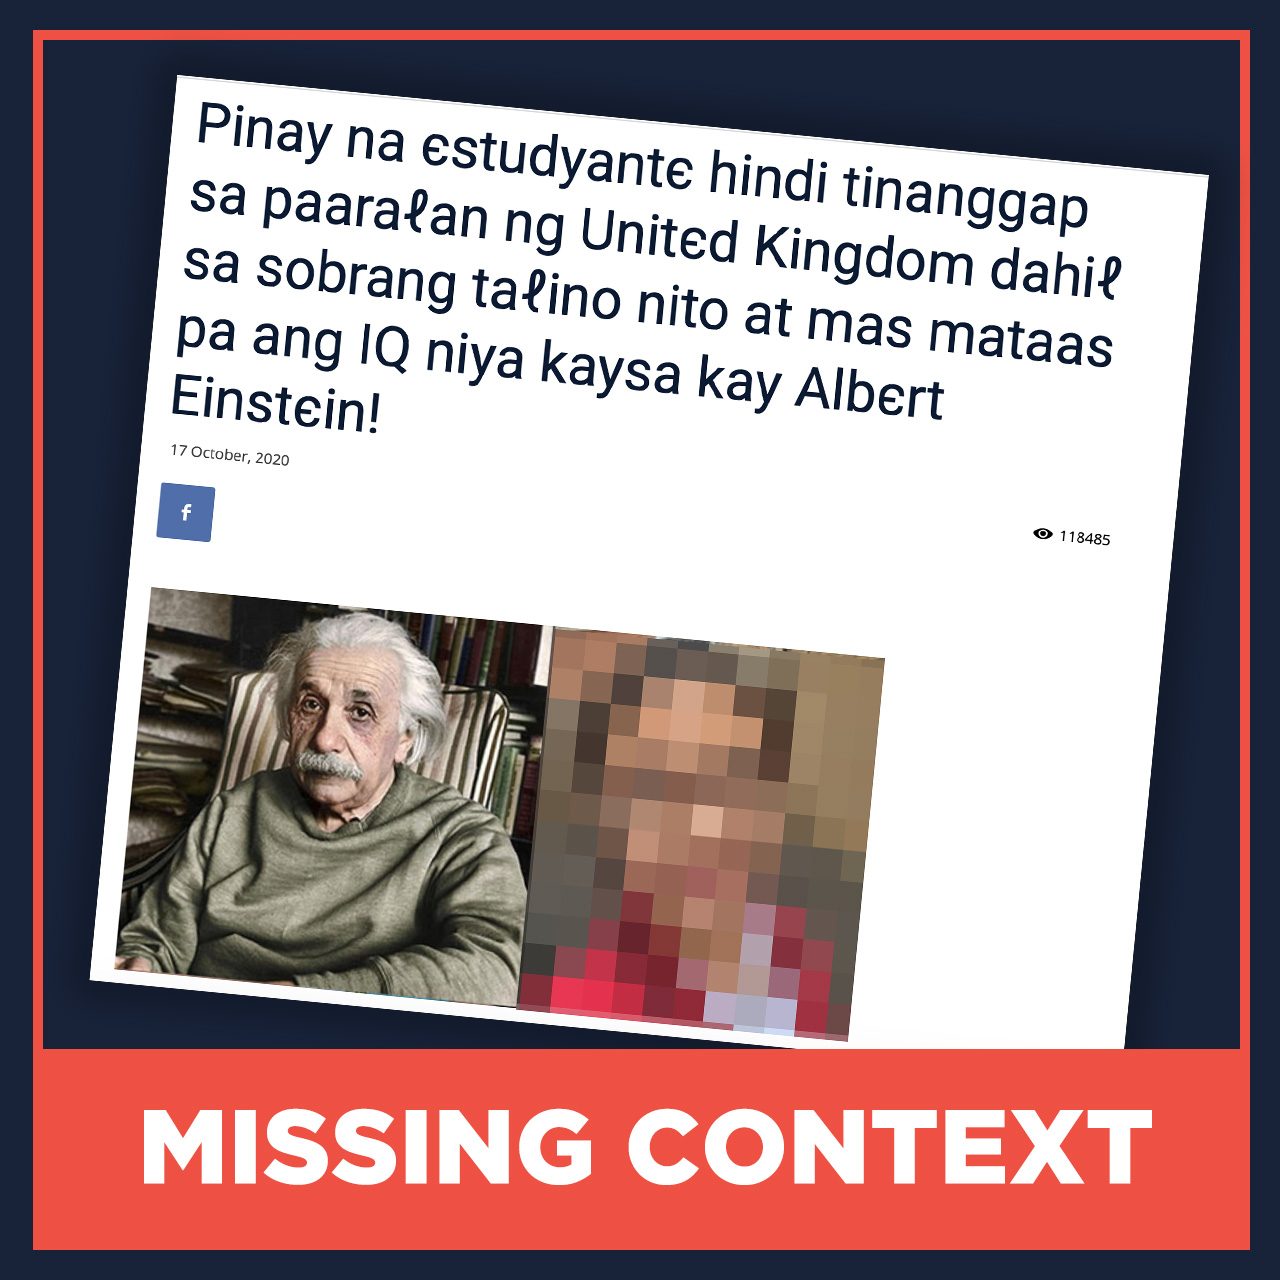 MISSING CONTEXT: Filipino student’s IQ is higher than Einstein’s